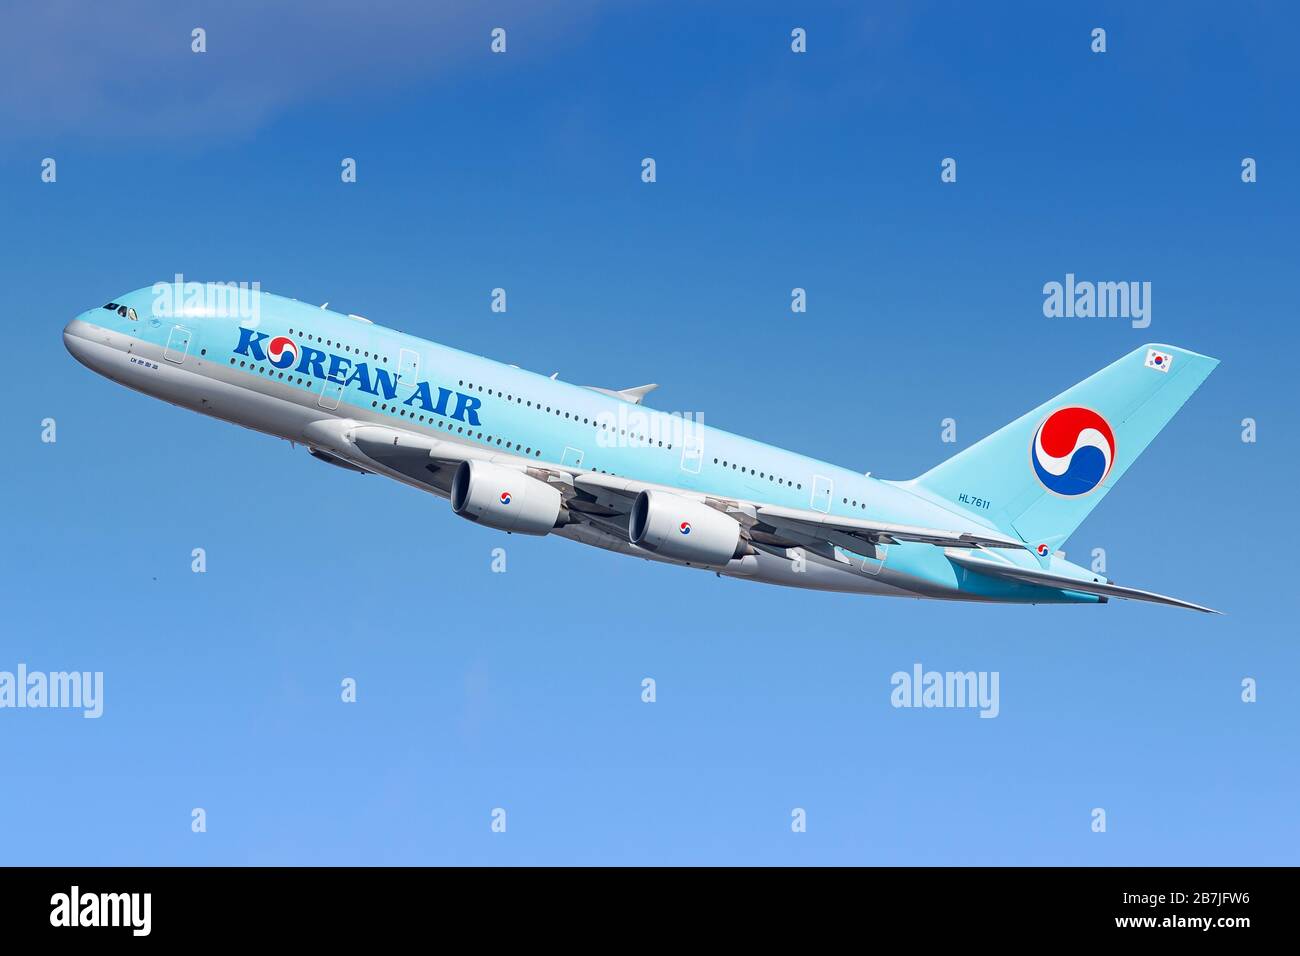 New York, USA - March 1, 2020: Korean Air Airbus A380-800 airplane at New York John F. Kennedy airport (JFK) in the USA. Airbus is an aircraft manufac Stock Photo